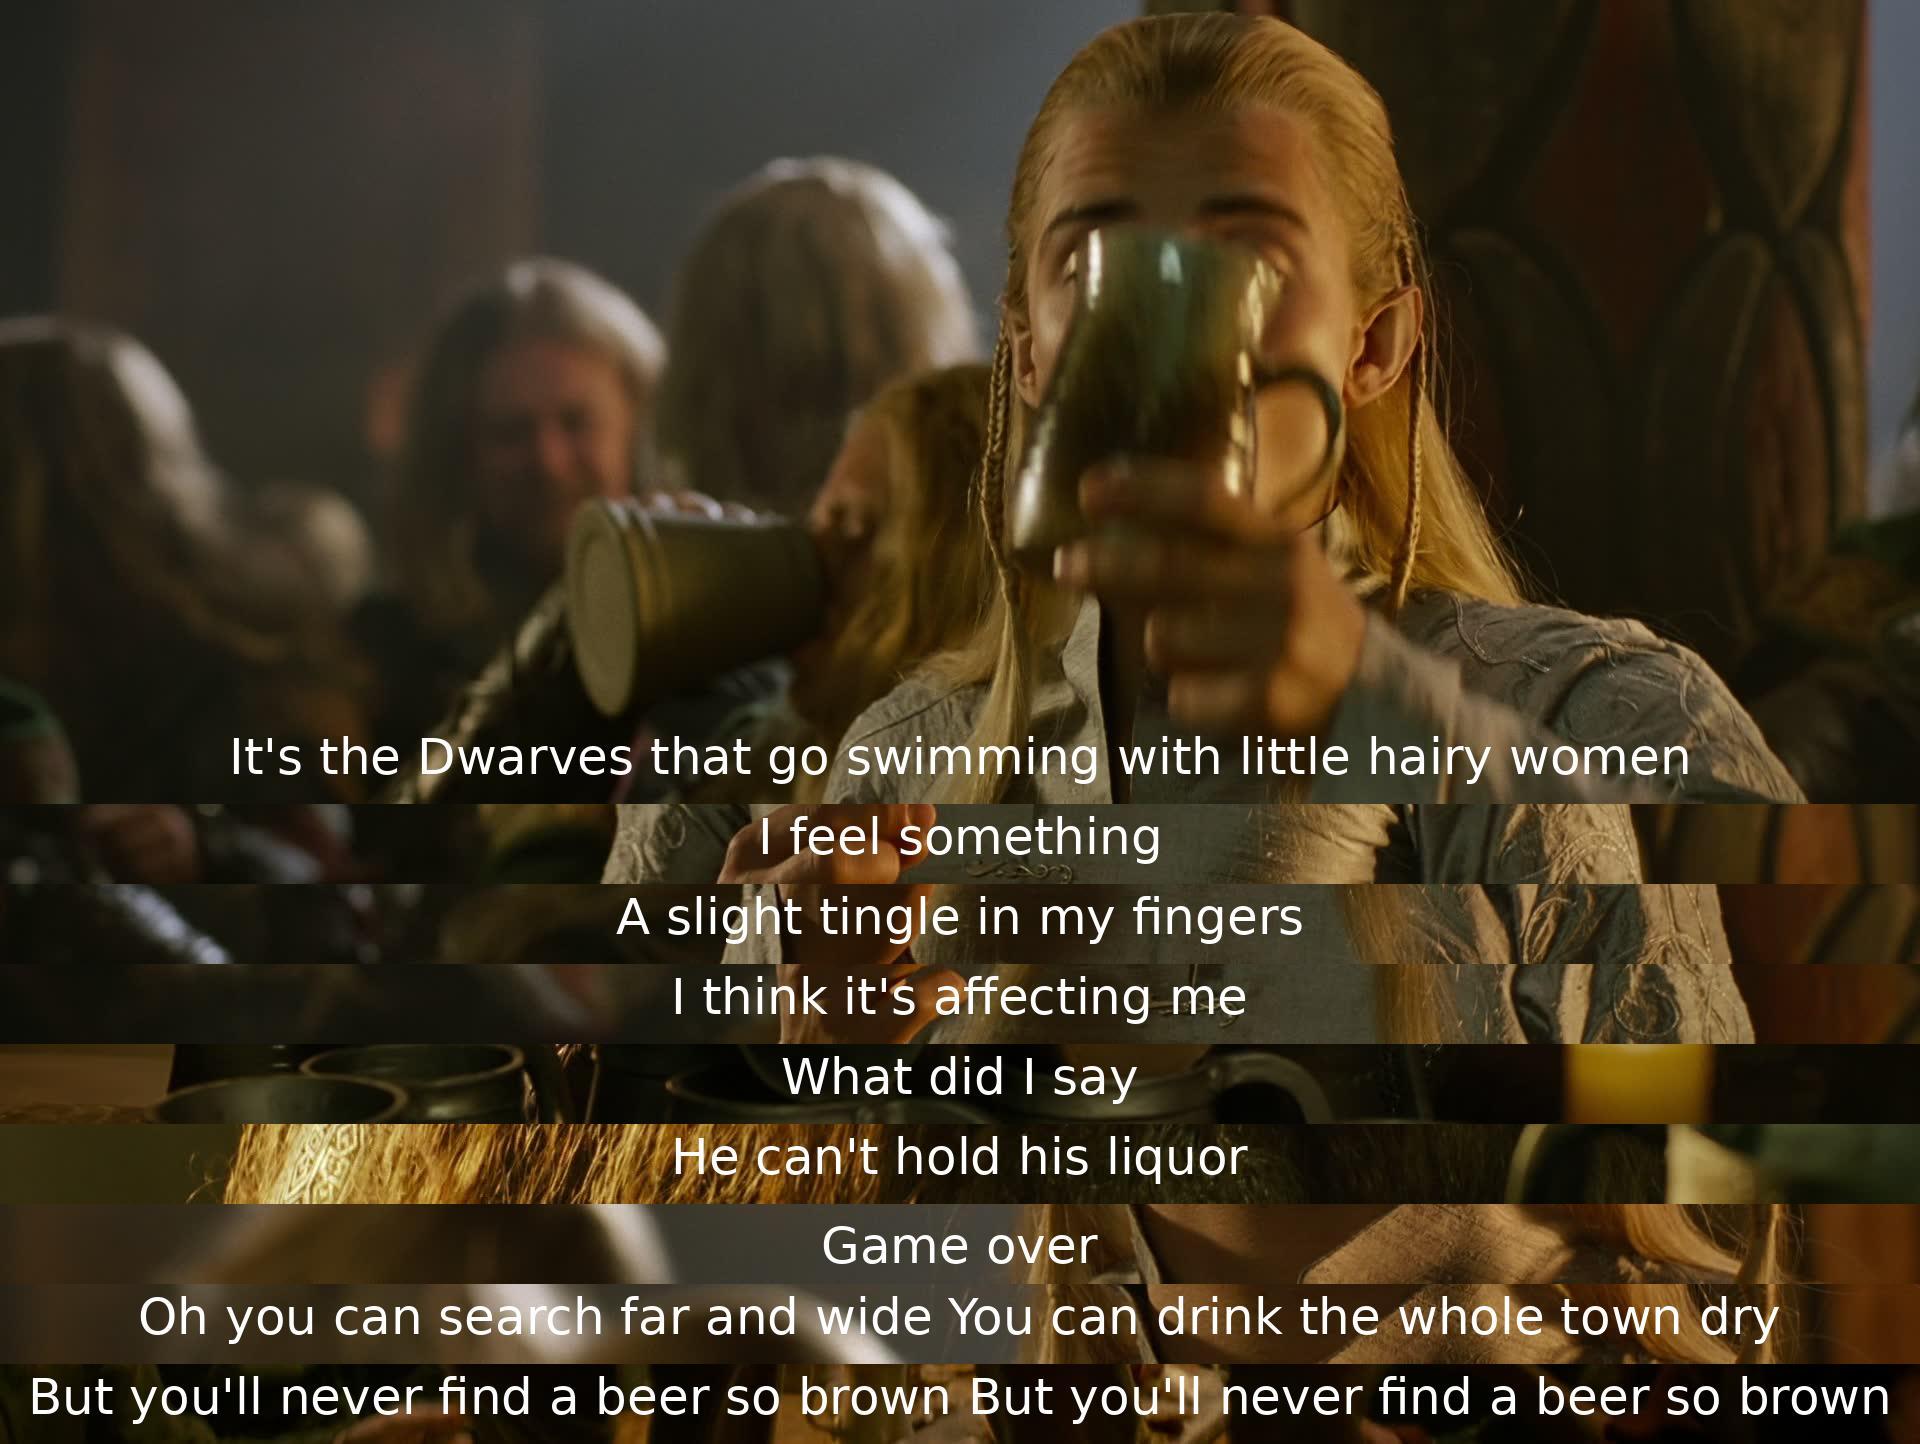 In the conversation, a character mentions Dwarves swimming with hairy women, feeling a tingling sensation in their fingers after drinking. Another character comments on someone being unable to handle alcohol. The dialogue humorously discusses the search for a specific type of beer.